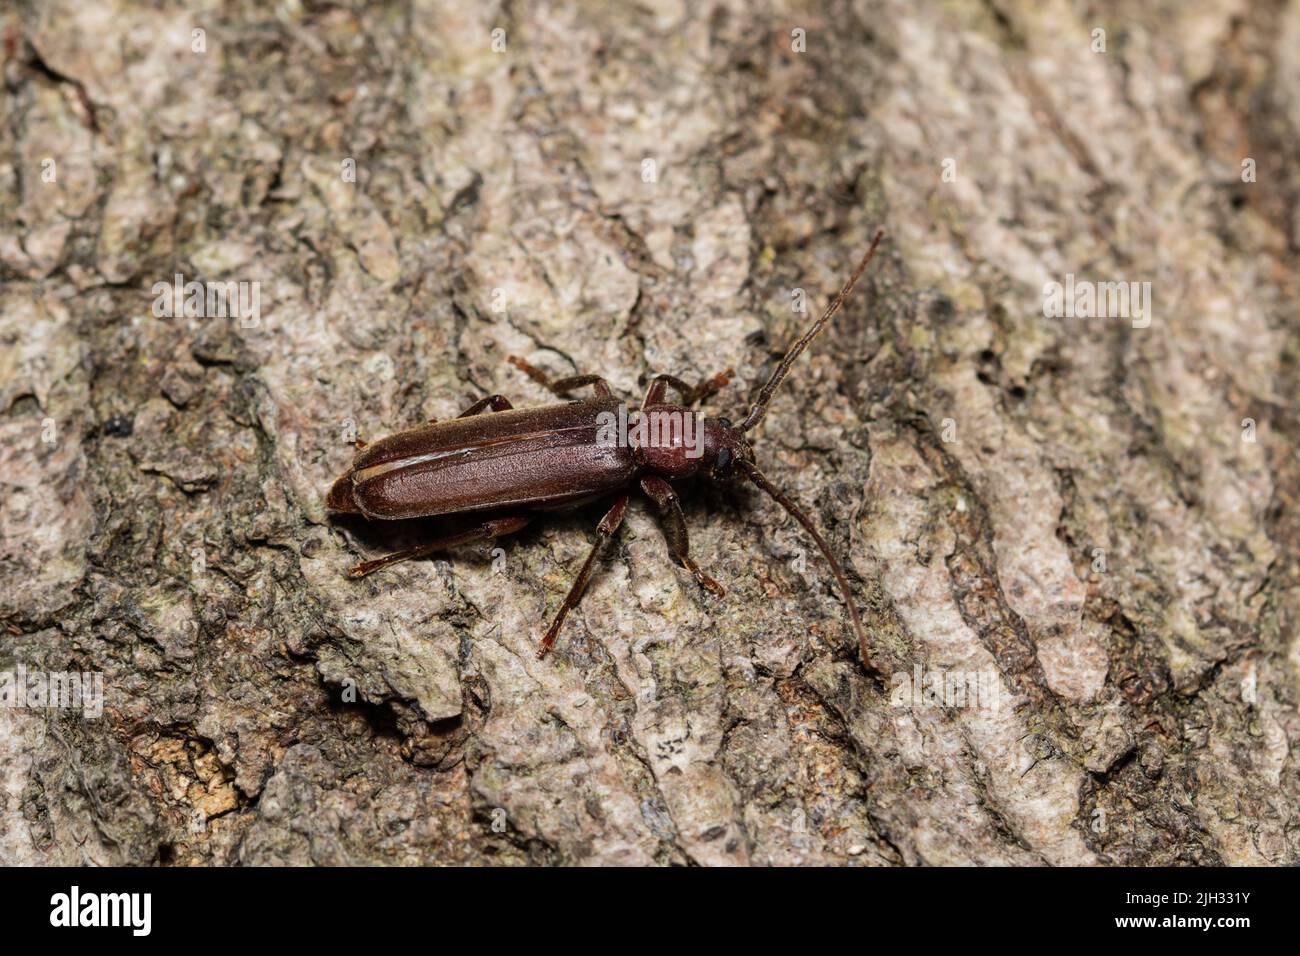 Arhopalus rusticus, sometimes called the dusky longhorn beetle is a member of the Cerambycidae family. Stock Photo